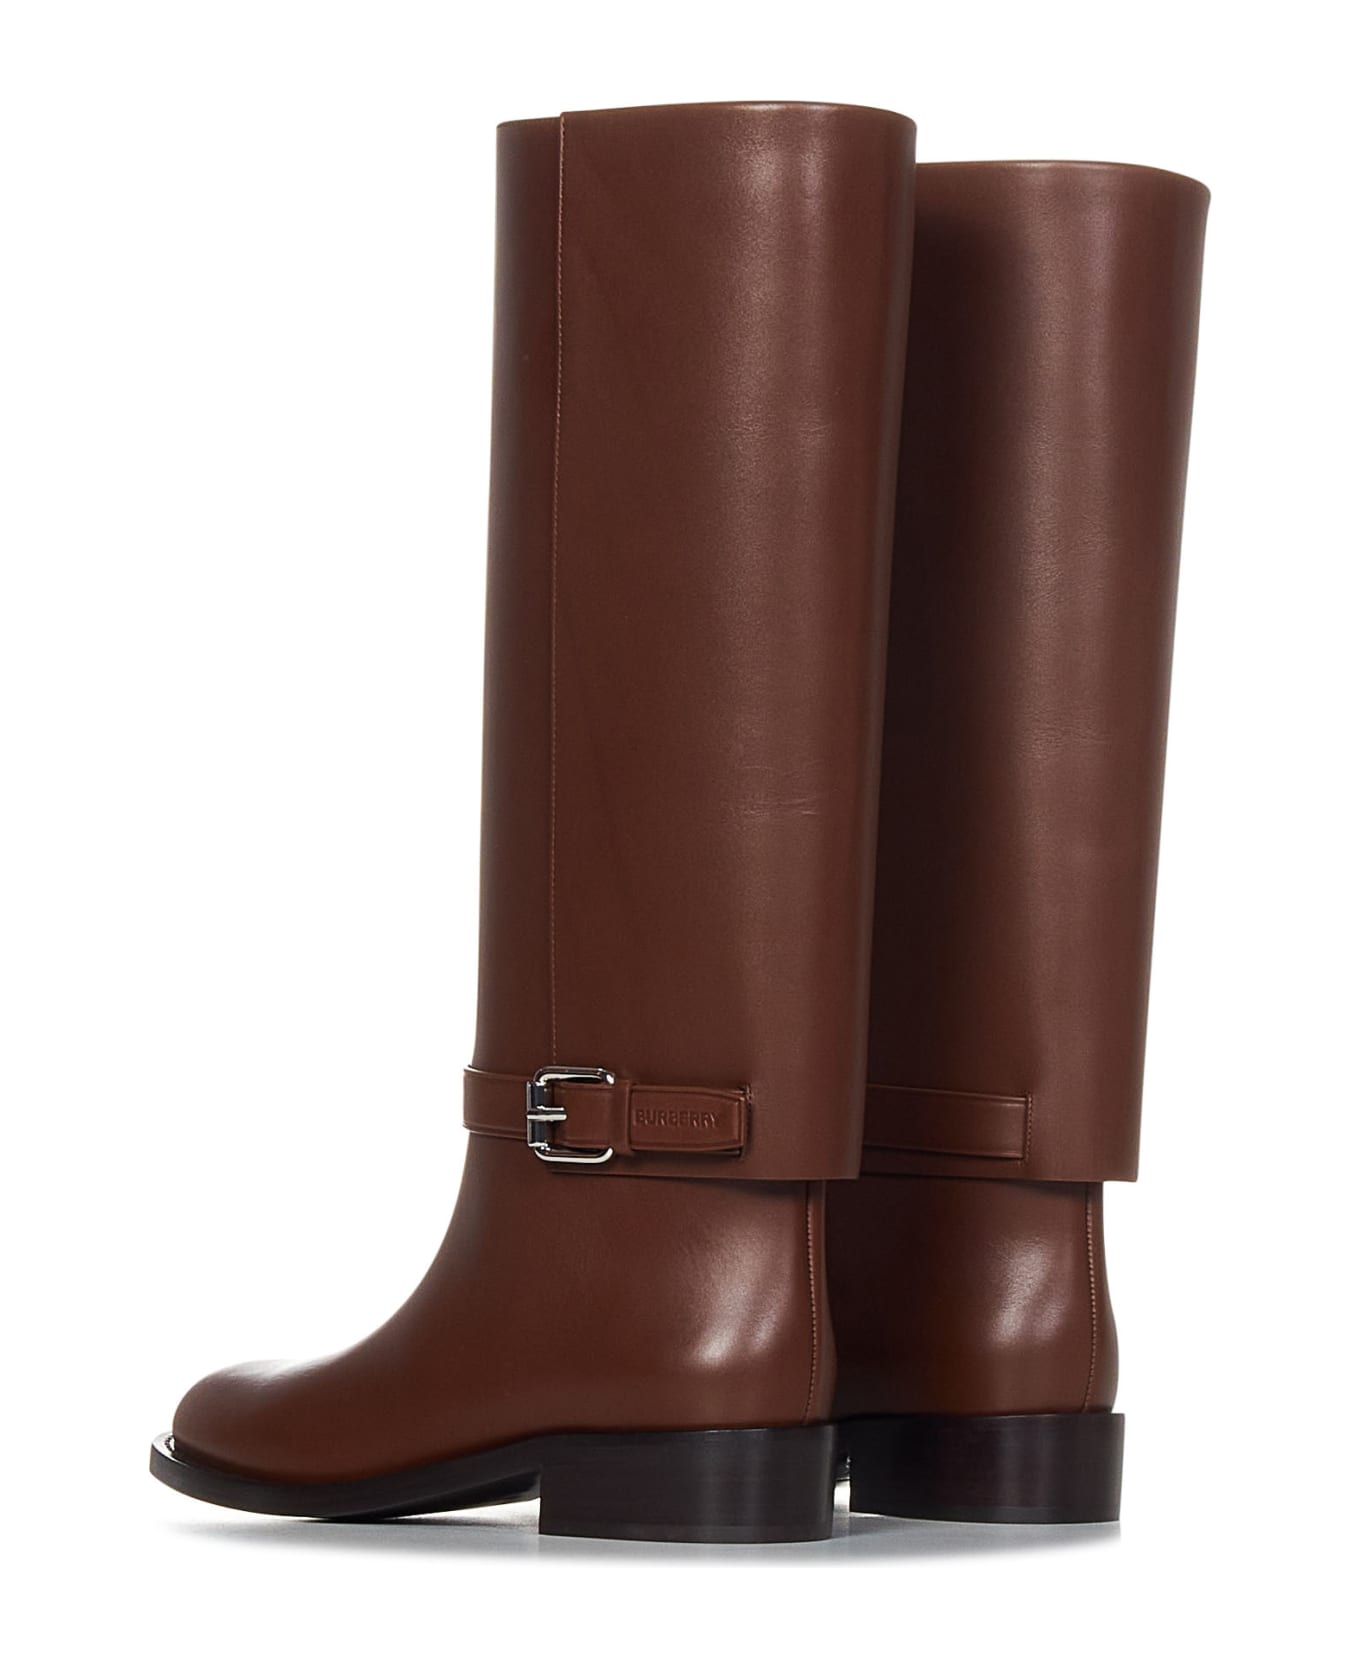 Burberry Boots - Brown ブーツ